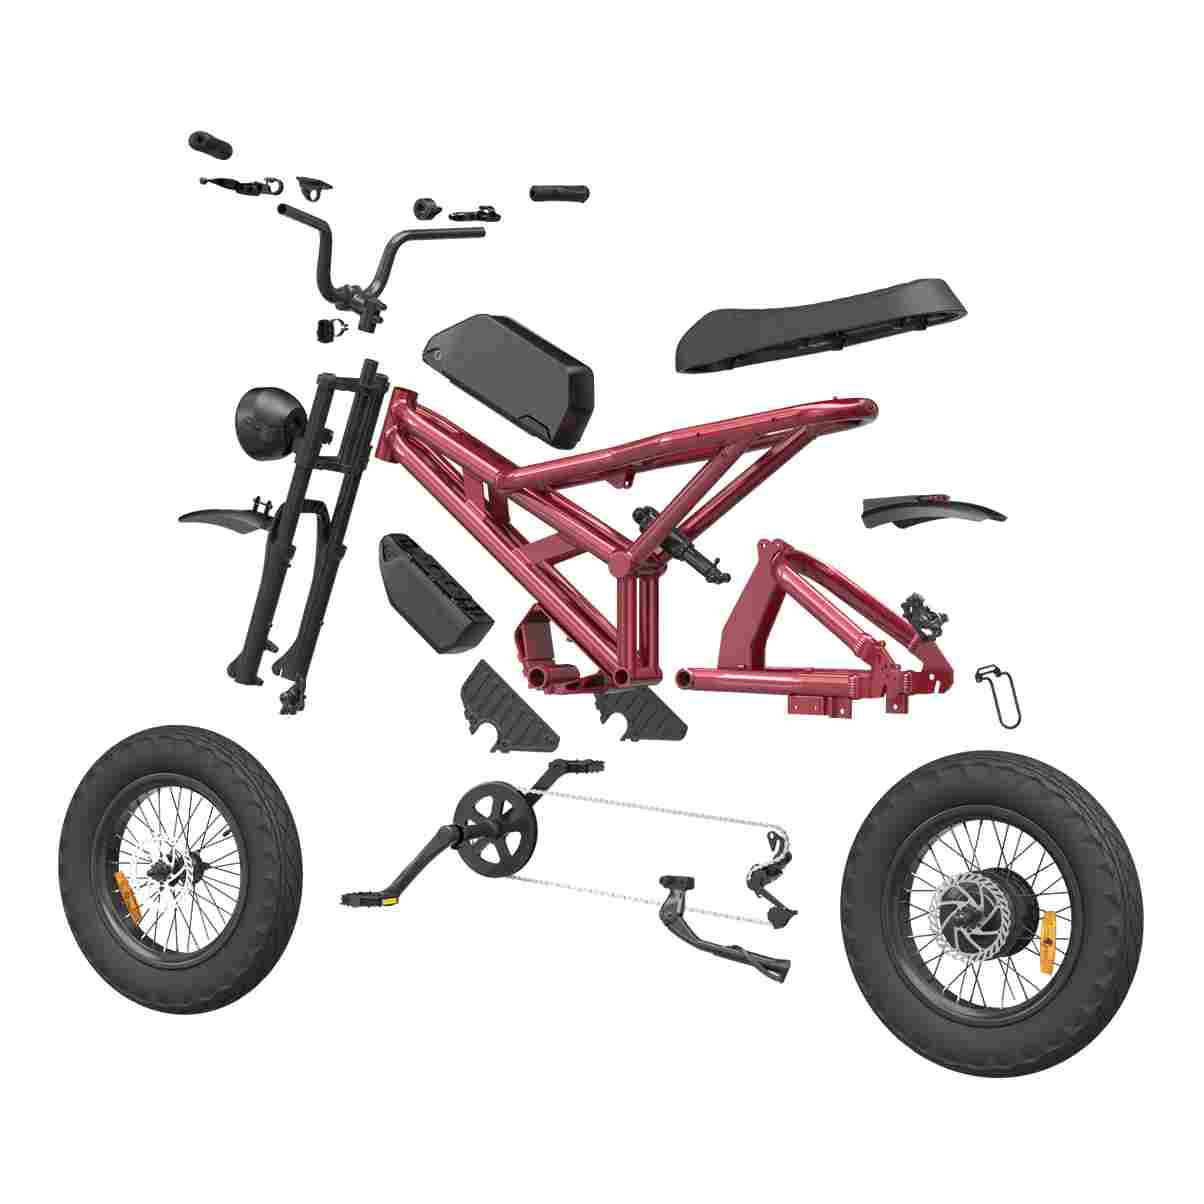 Electric Start Dirt Bike For Sale wholesale price